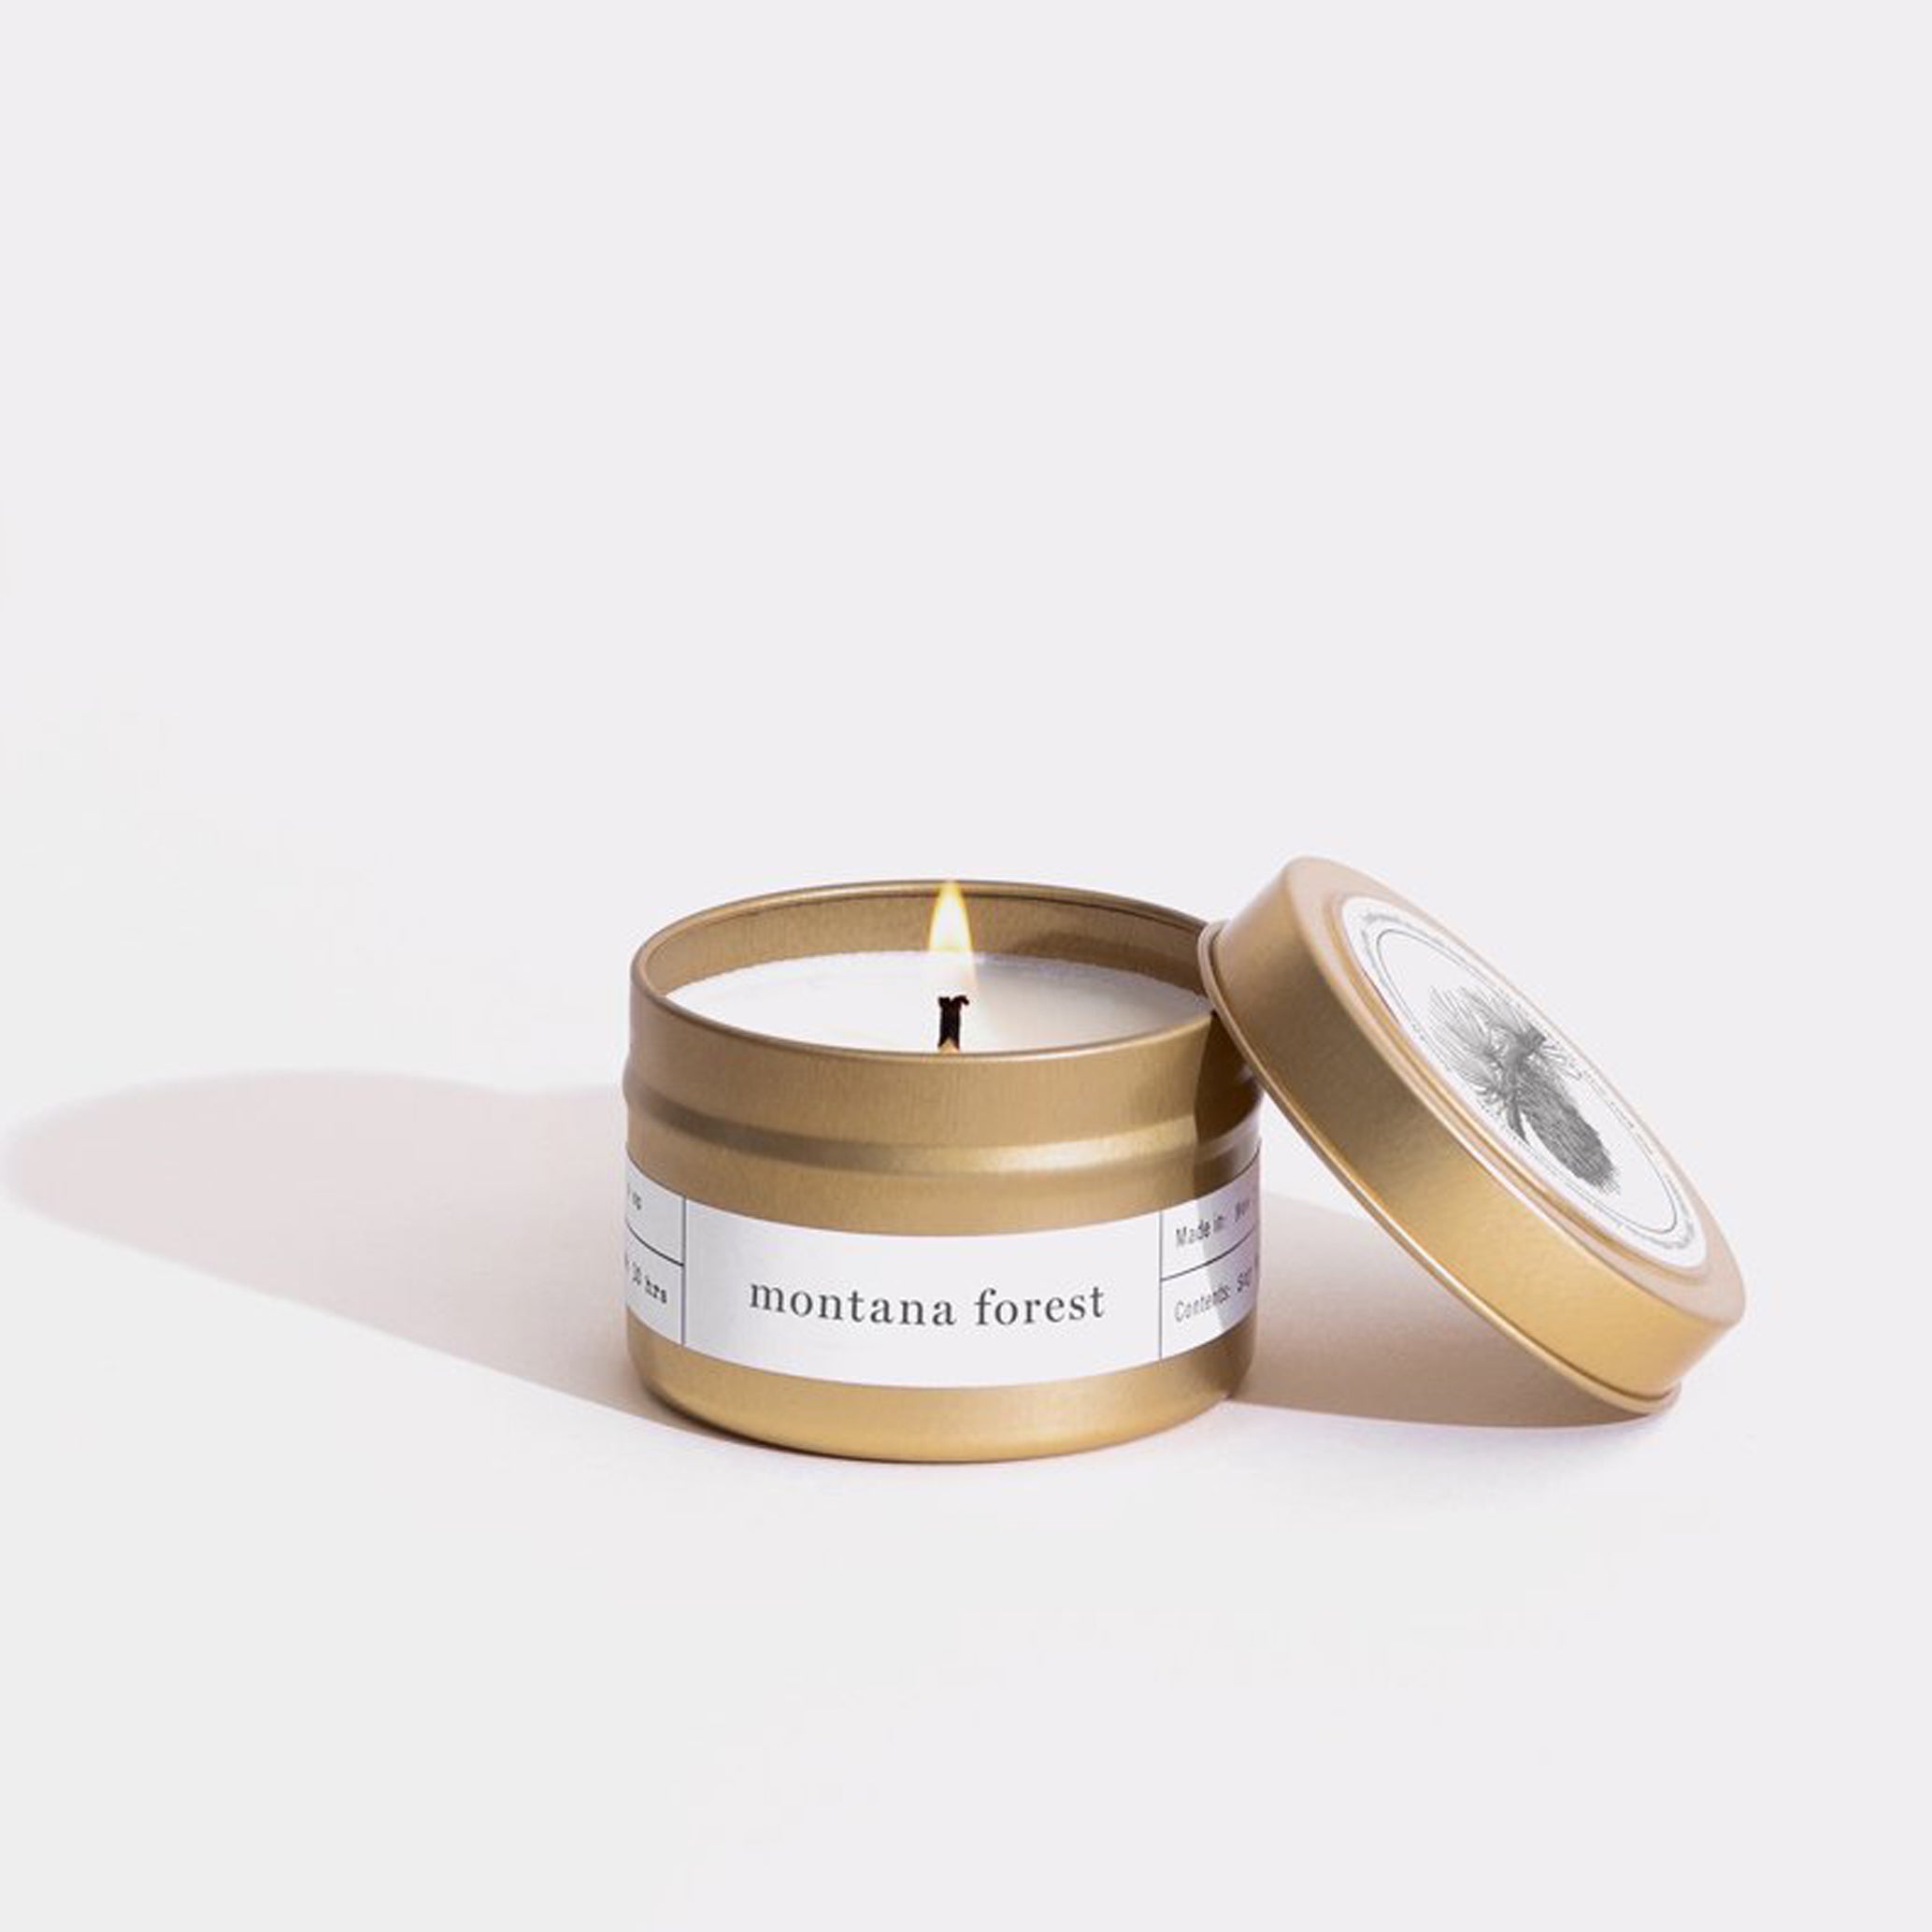 Brooklyn Candle Studio / Gold Travel Candle 07 MONTANA FOREST